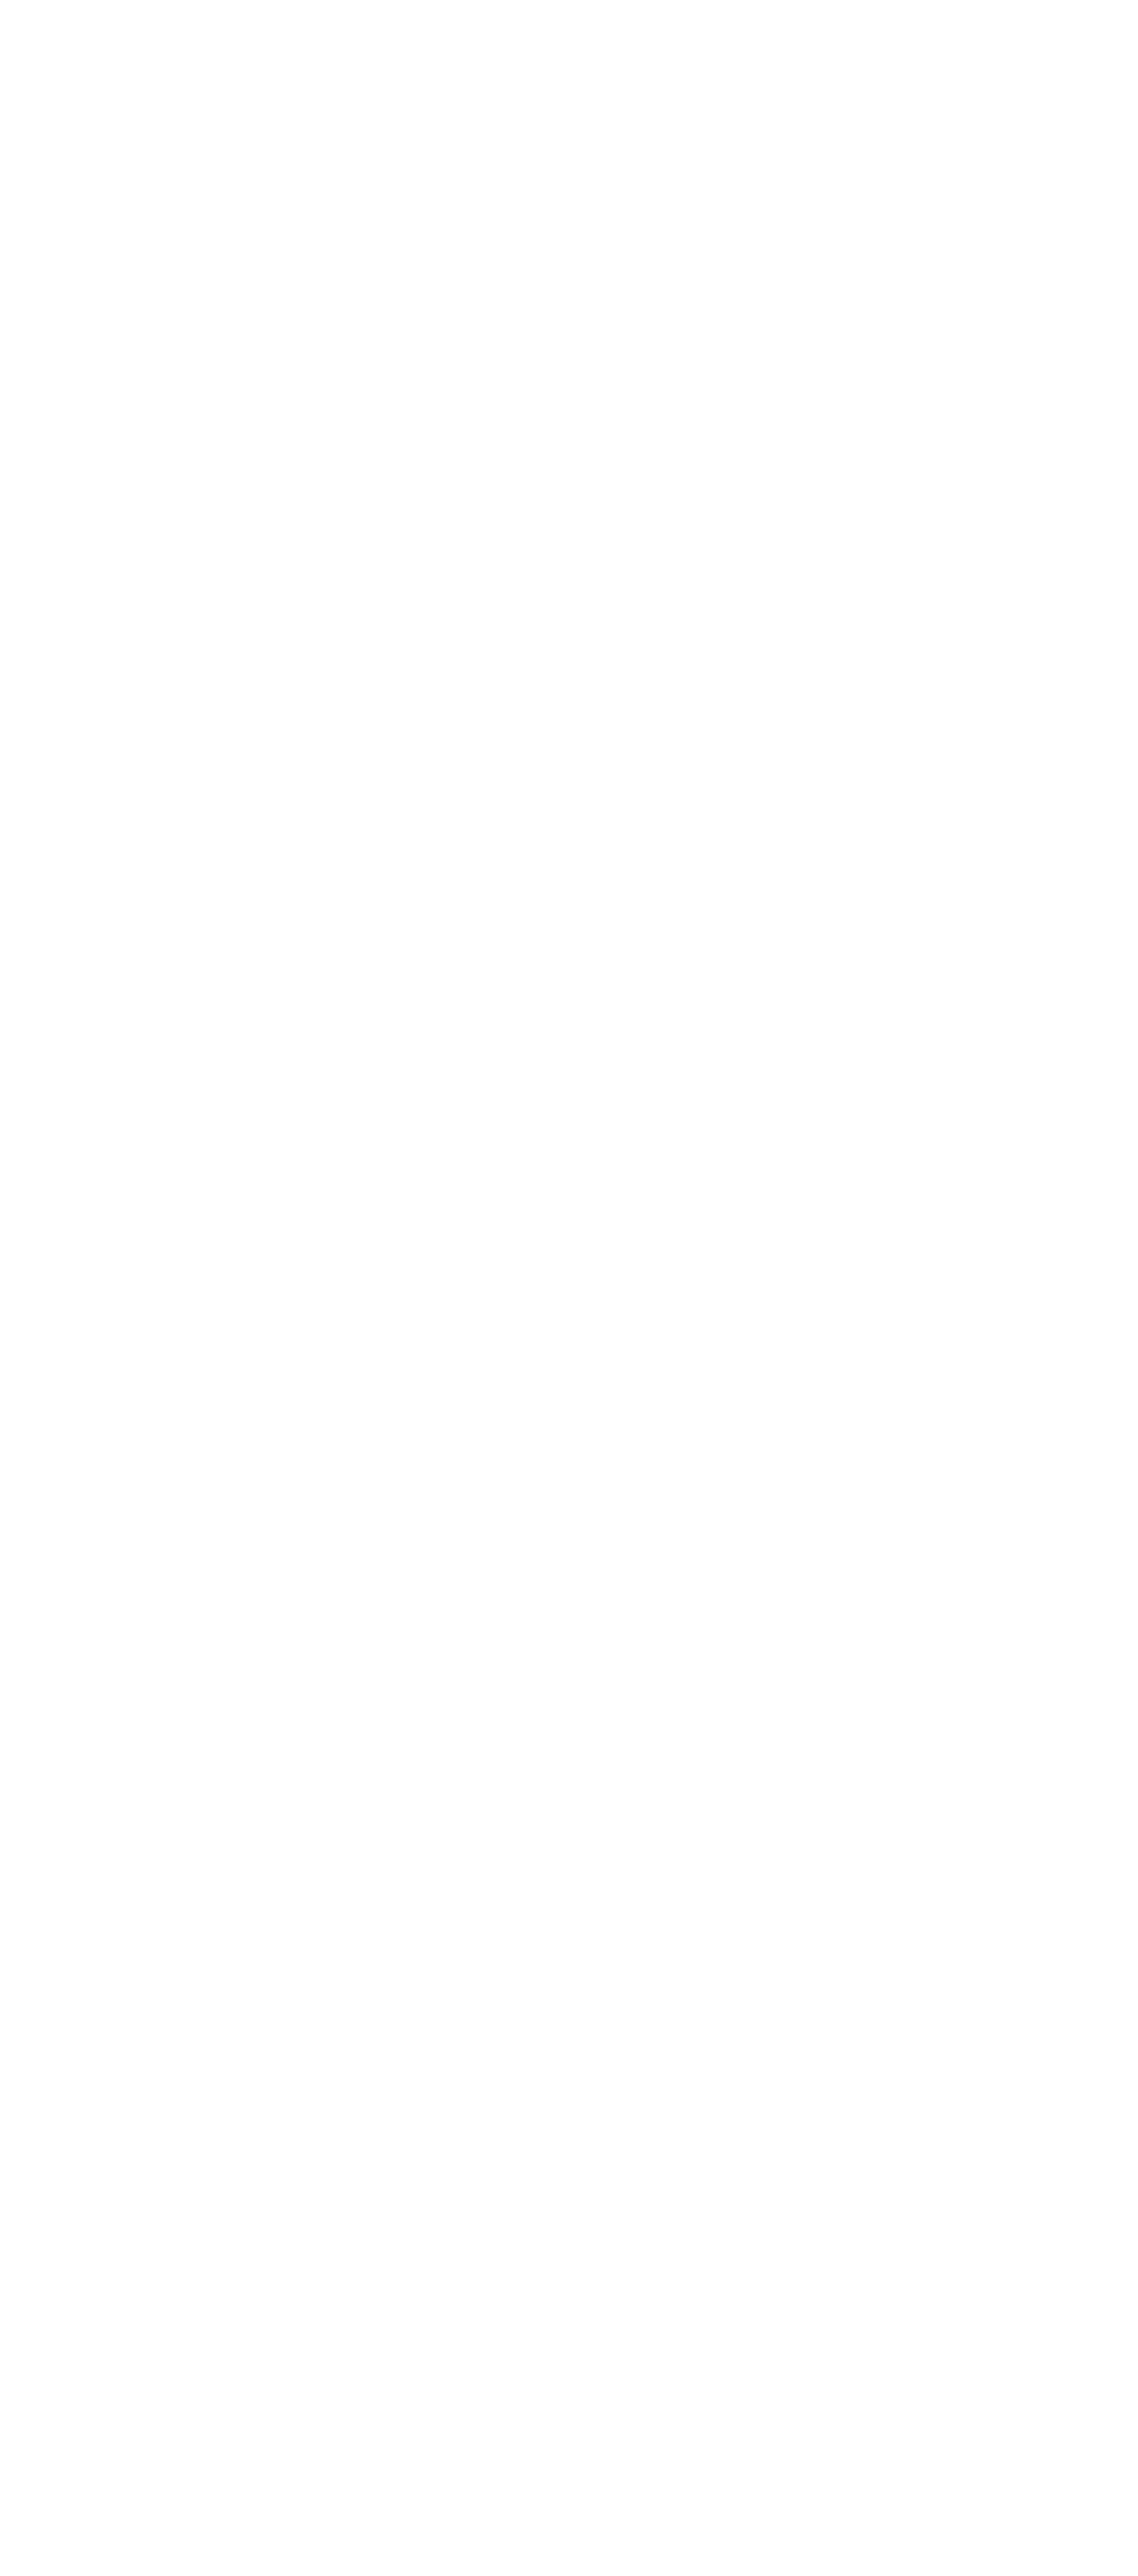 Garnier Nutrisse Ultra Cr me Nourishing Permanent Color nourishes as it colors for 2x shinier, silkier, and nourished...